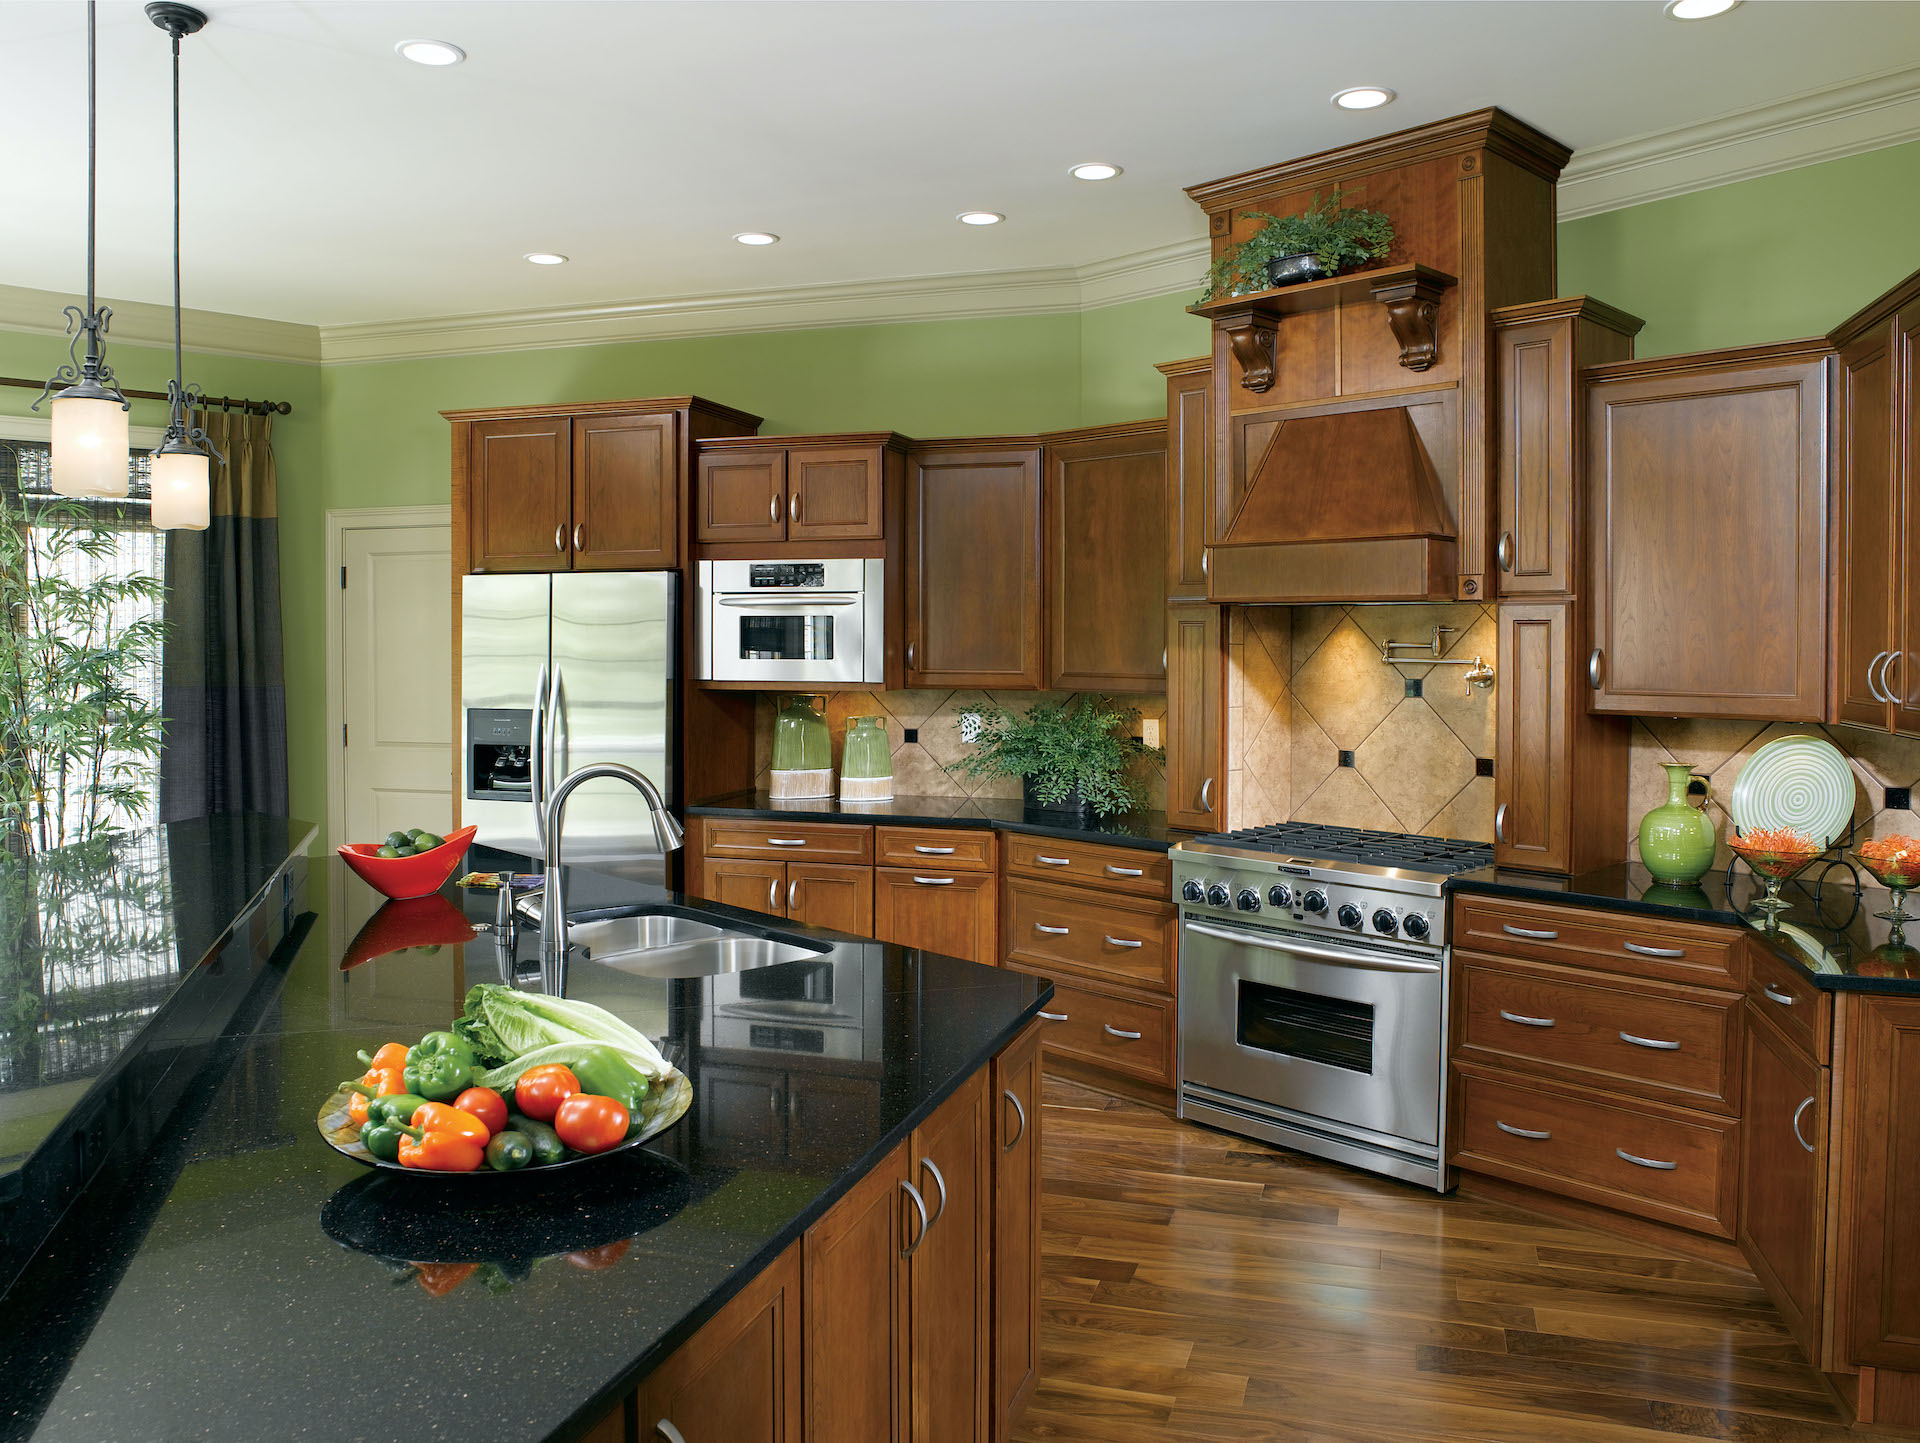 Kitchenland How to Pick the Perfect Kitchen Cabinets
